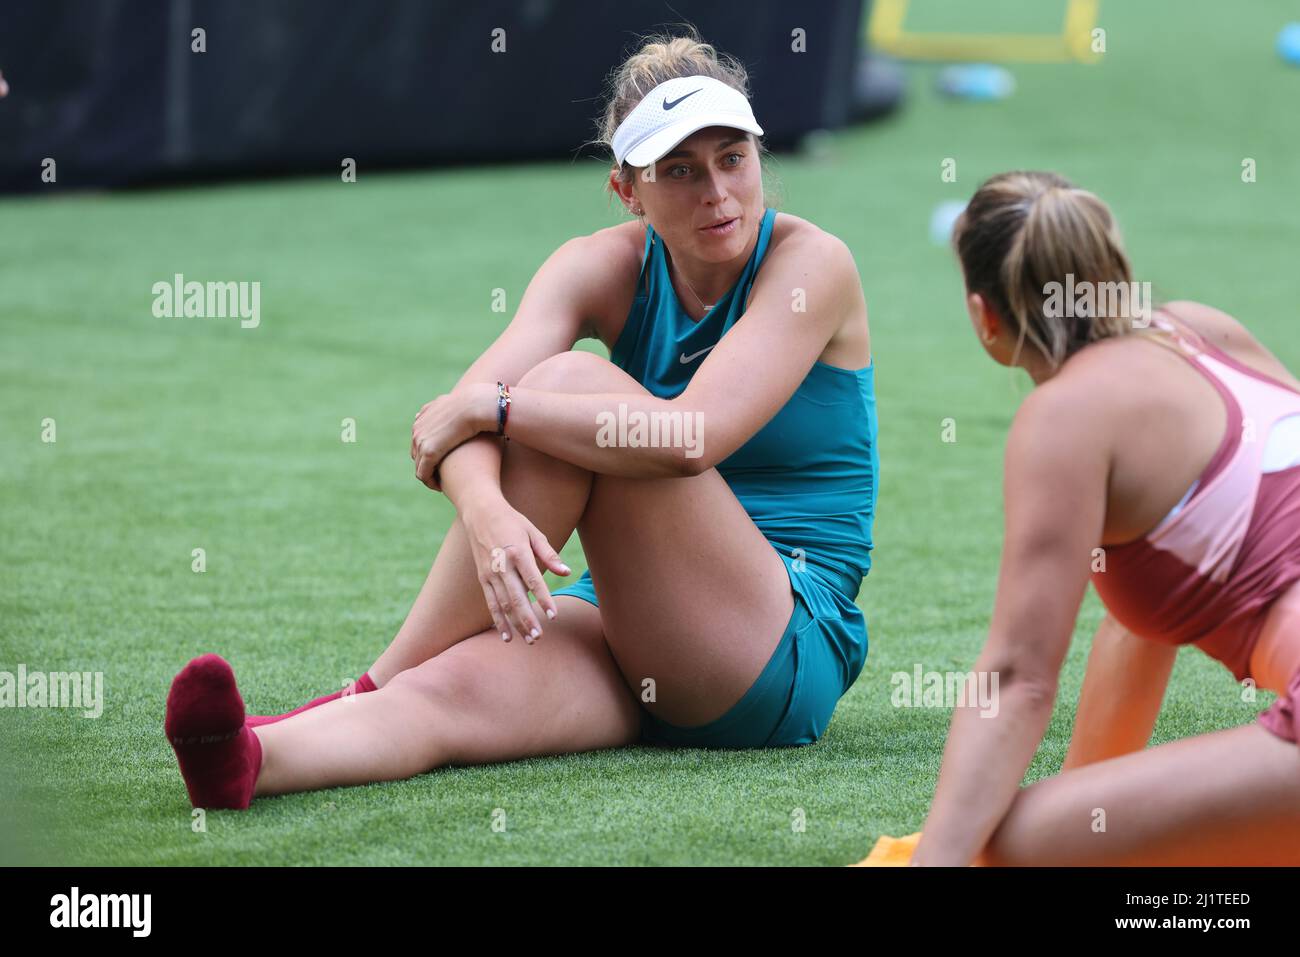 MIAMI GARDENS, FLORIDA - MARCH 27: Belarusian professional tennis player  Aryna Sabalenka and Spanish professional tennis player Paula Badosa during  day 7 of the Miami Open at Hard Rock Stadium on March